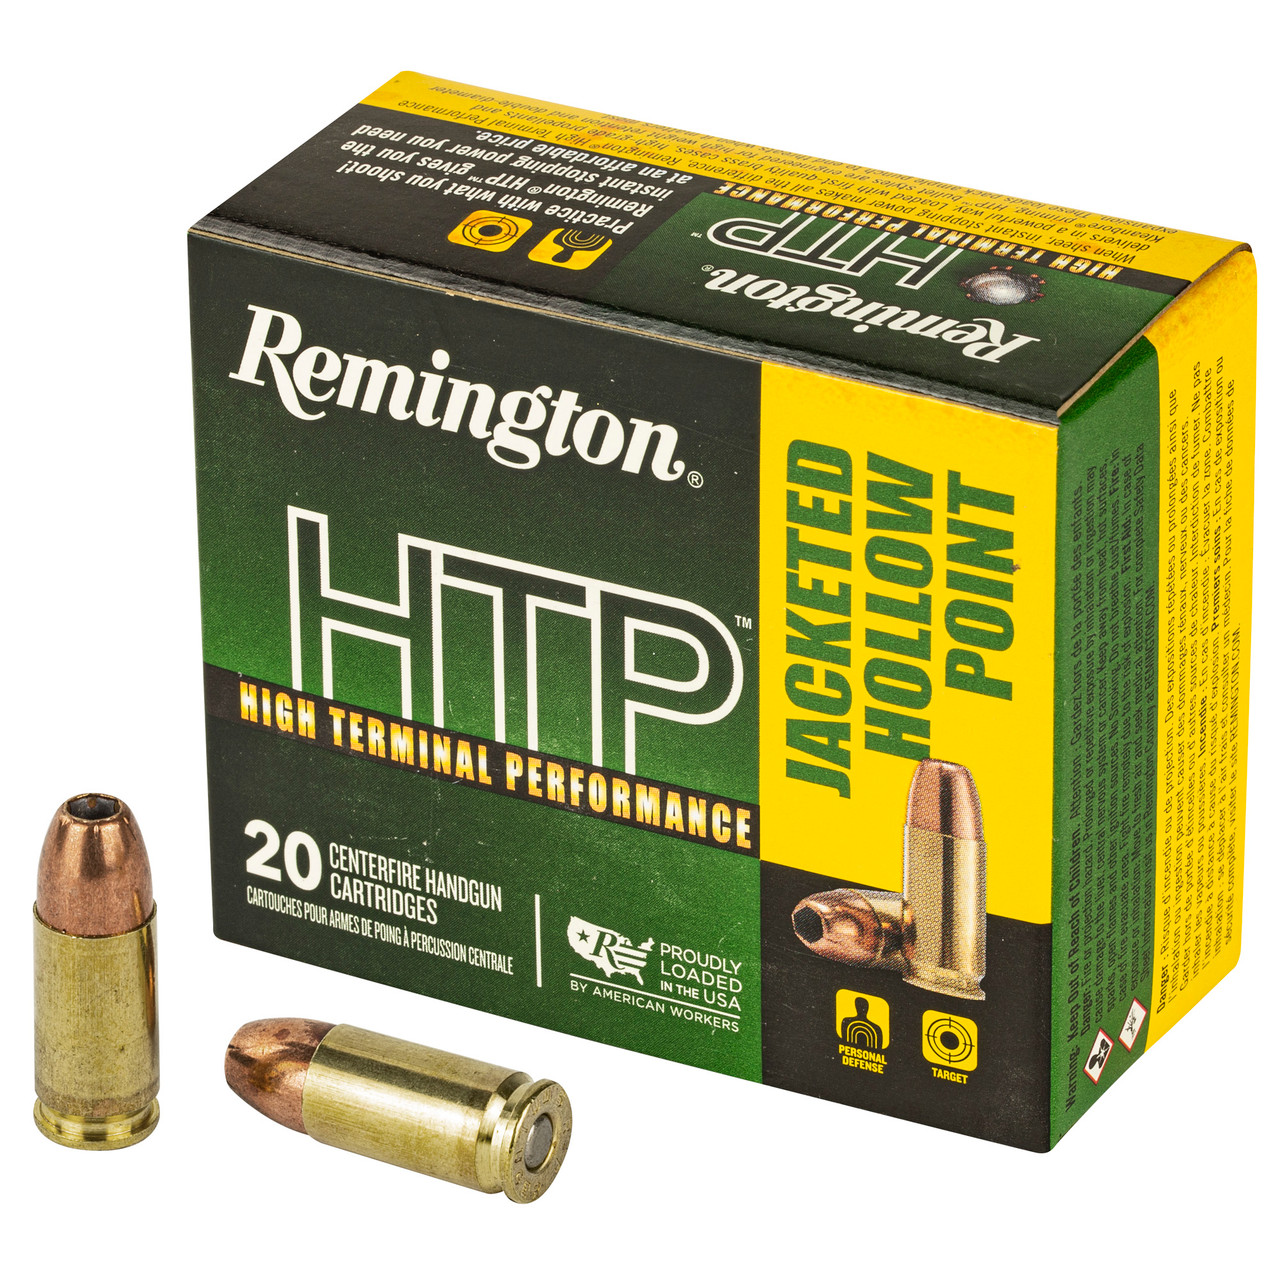 Remington 28295 High Terminal Performance, 9MM, 147 Grain, Jacketed Hollow Point, 20 Round Box